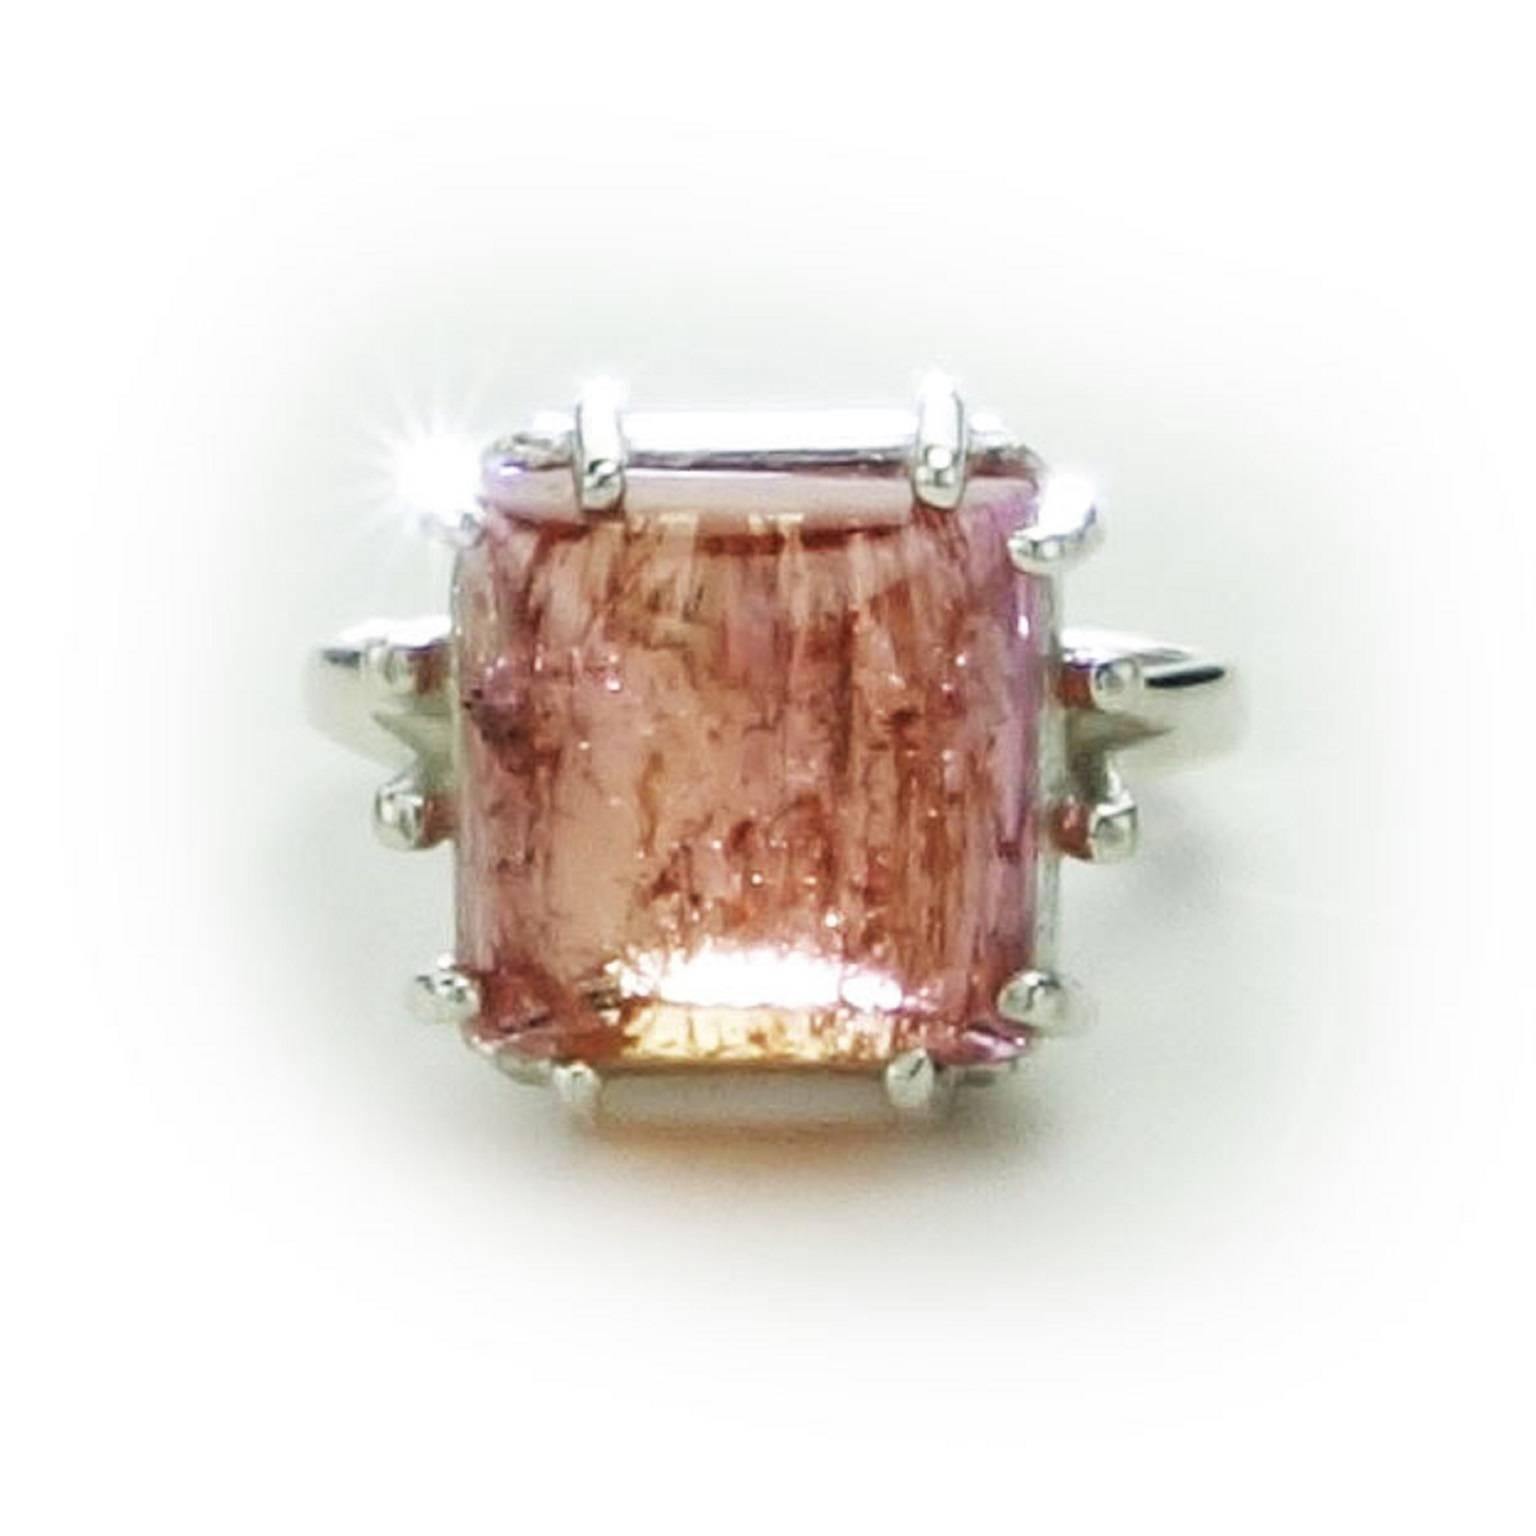 Glowing pinkish/orange Imperial Topaz square cabochon set in eight prong Sterling Silver ring.  The color in this gemstone is truly lovely.  The typical Imperial Topaz inclusions enhance the gemstone's sparkle.  It measures 11x11mm and weighs 10.03